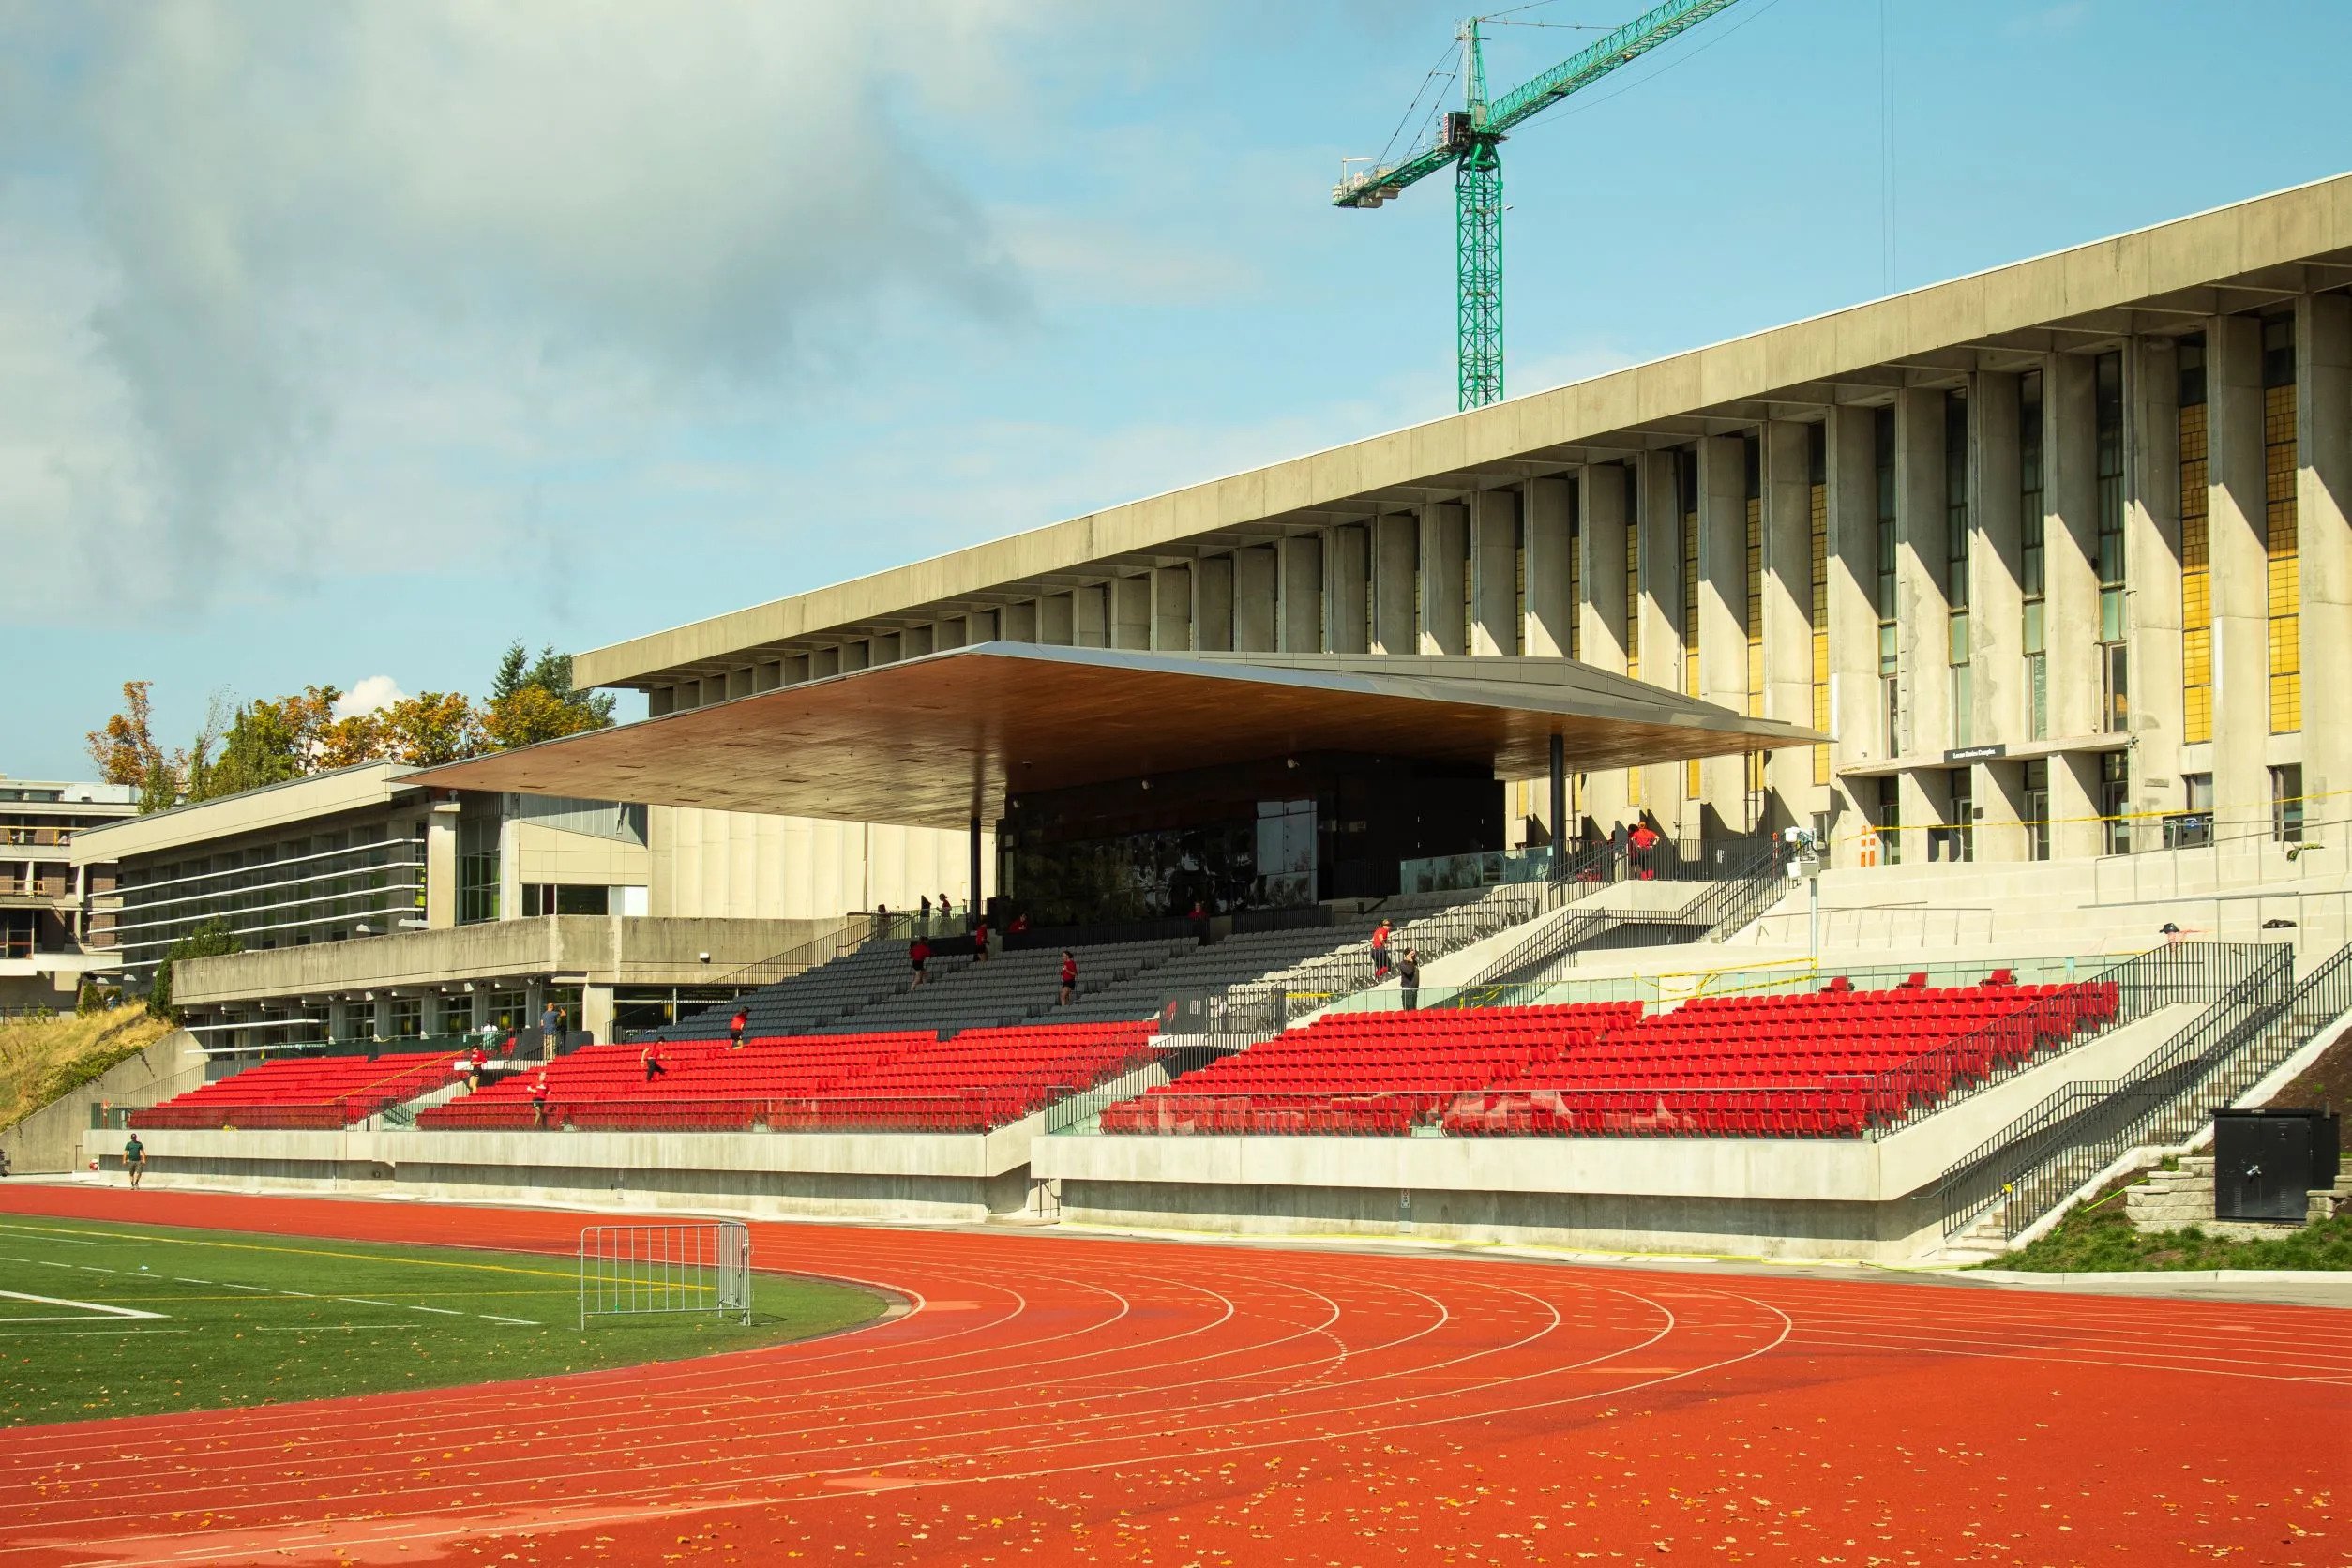 Photo of the SFU stadium. The stands are nearly empty, only a few people walking. The outdoor stadium is seen with a sunny sky behind.